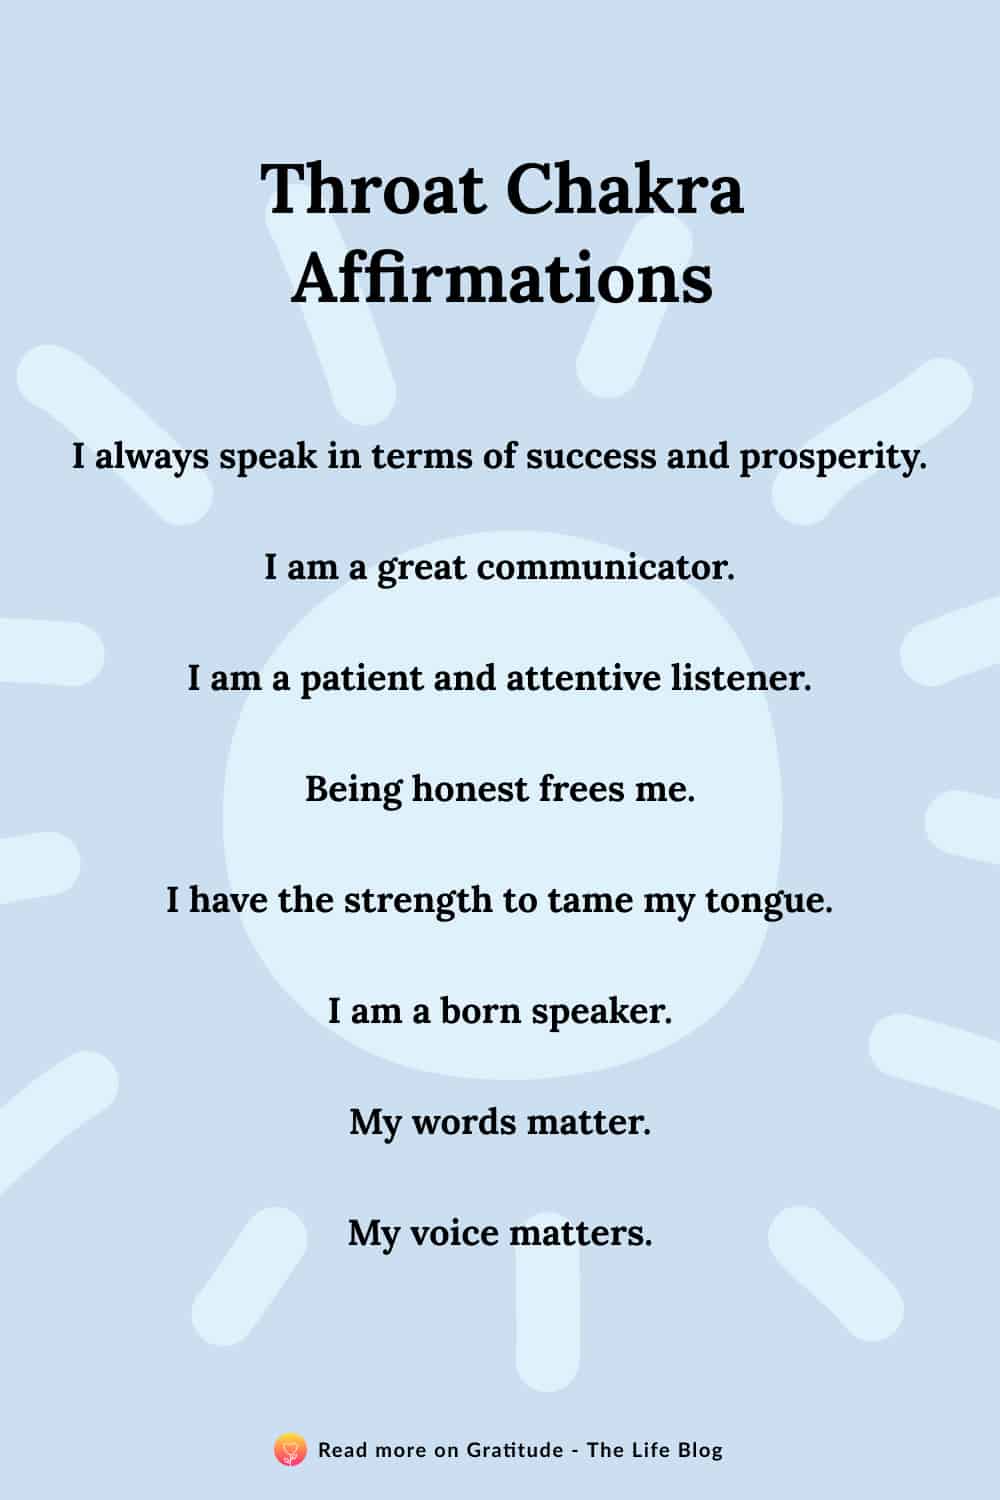 Image with list of throat chakra affirmations